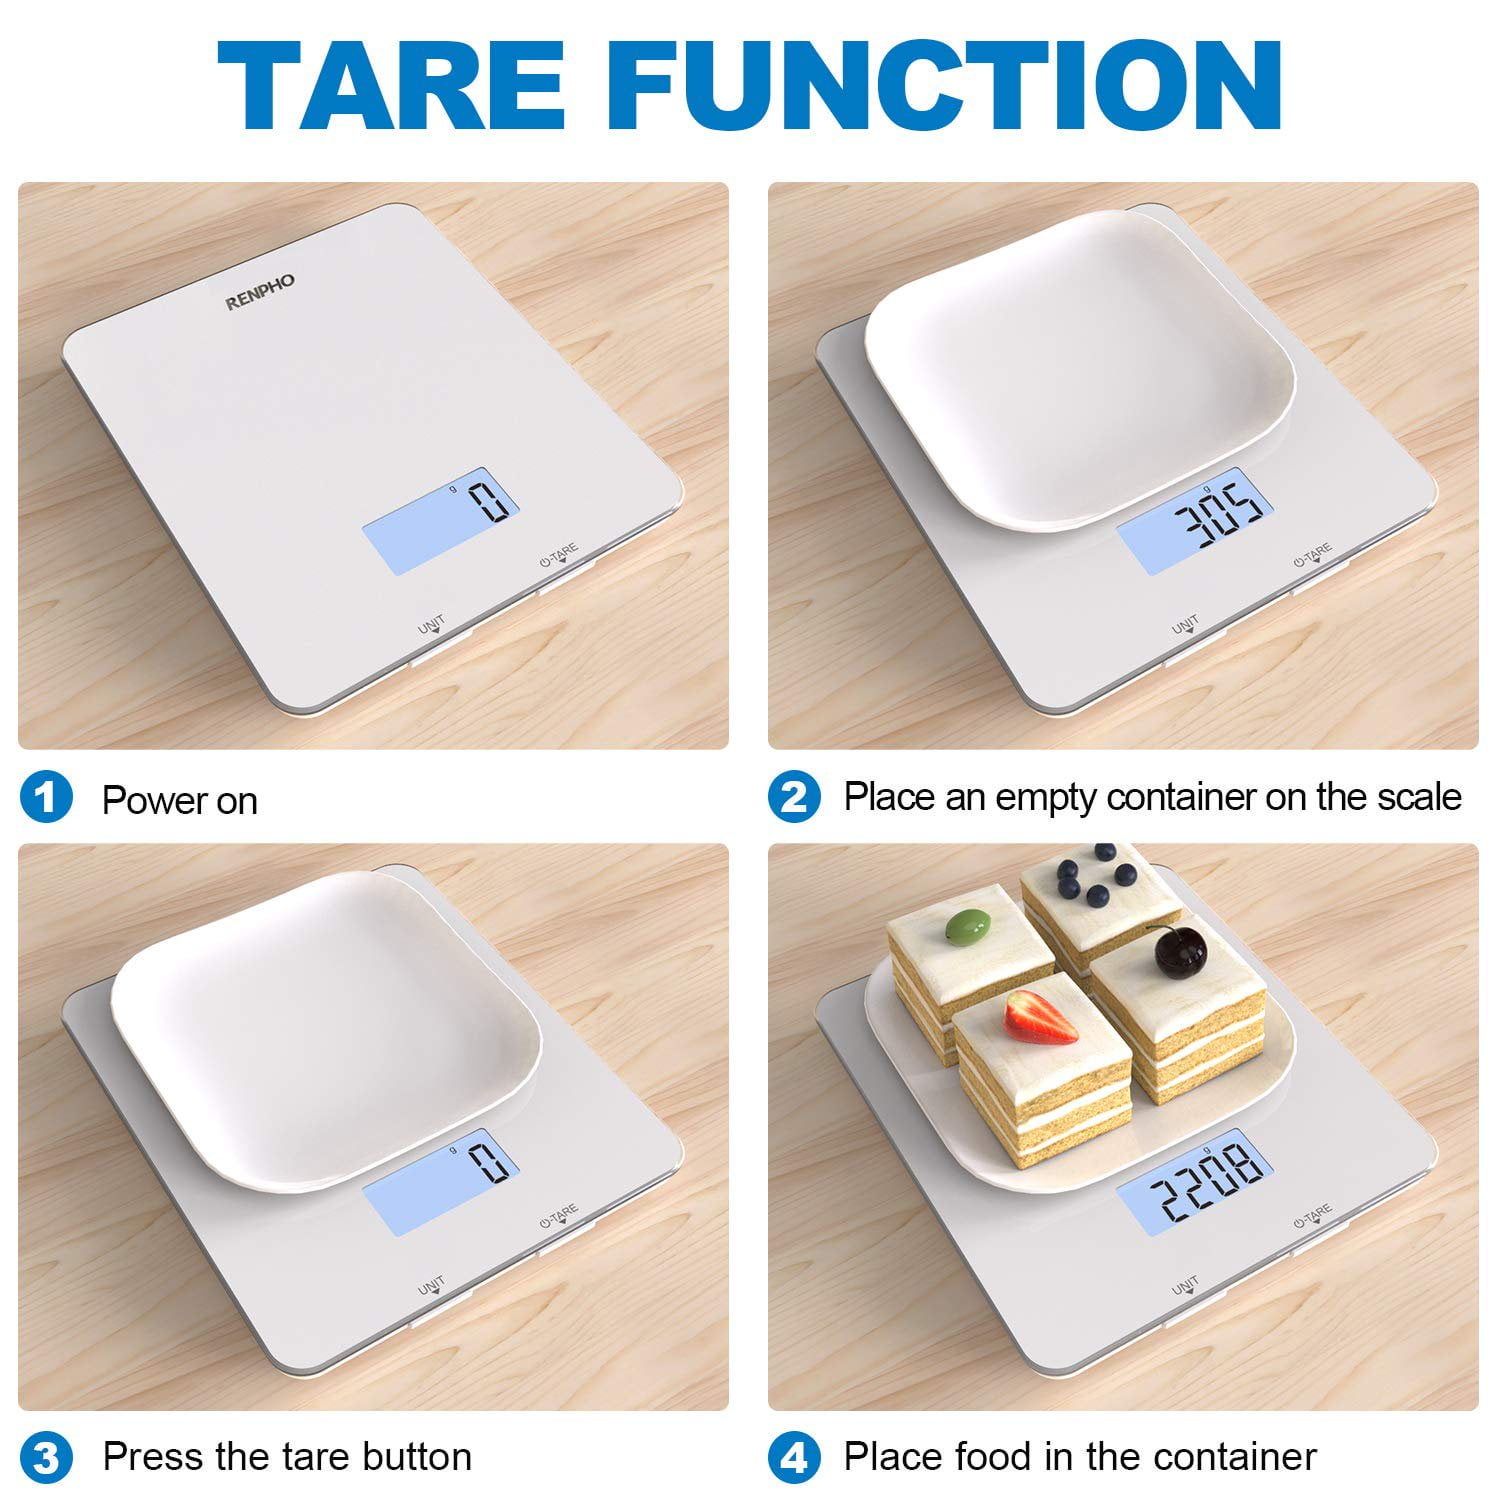  RENPHO Food Scale, Kitchen Scale for Food Ounces and Grams,  Smart Cooking and Coffee Scale with Timer, Nutritional Calculator for Keto,  Macro, and Calorie with Smartphone App, White  Review Analysis